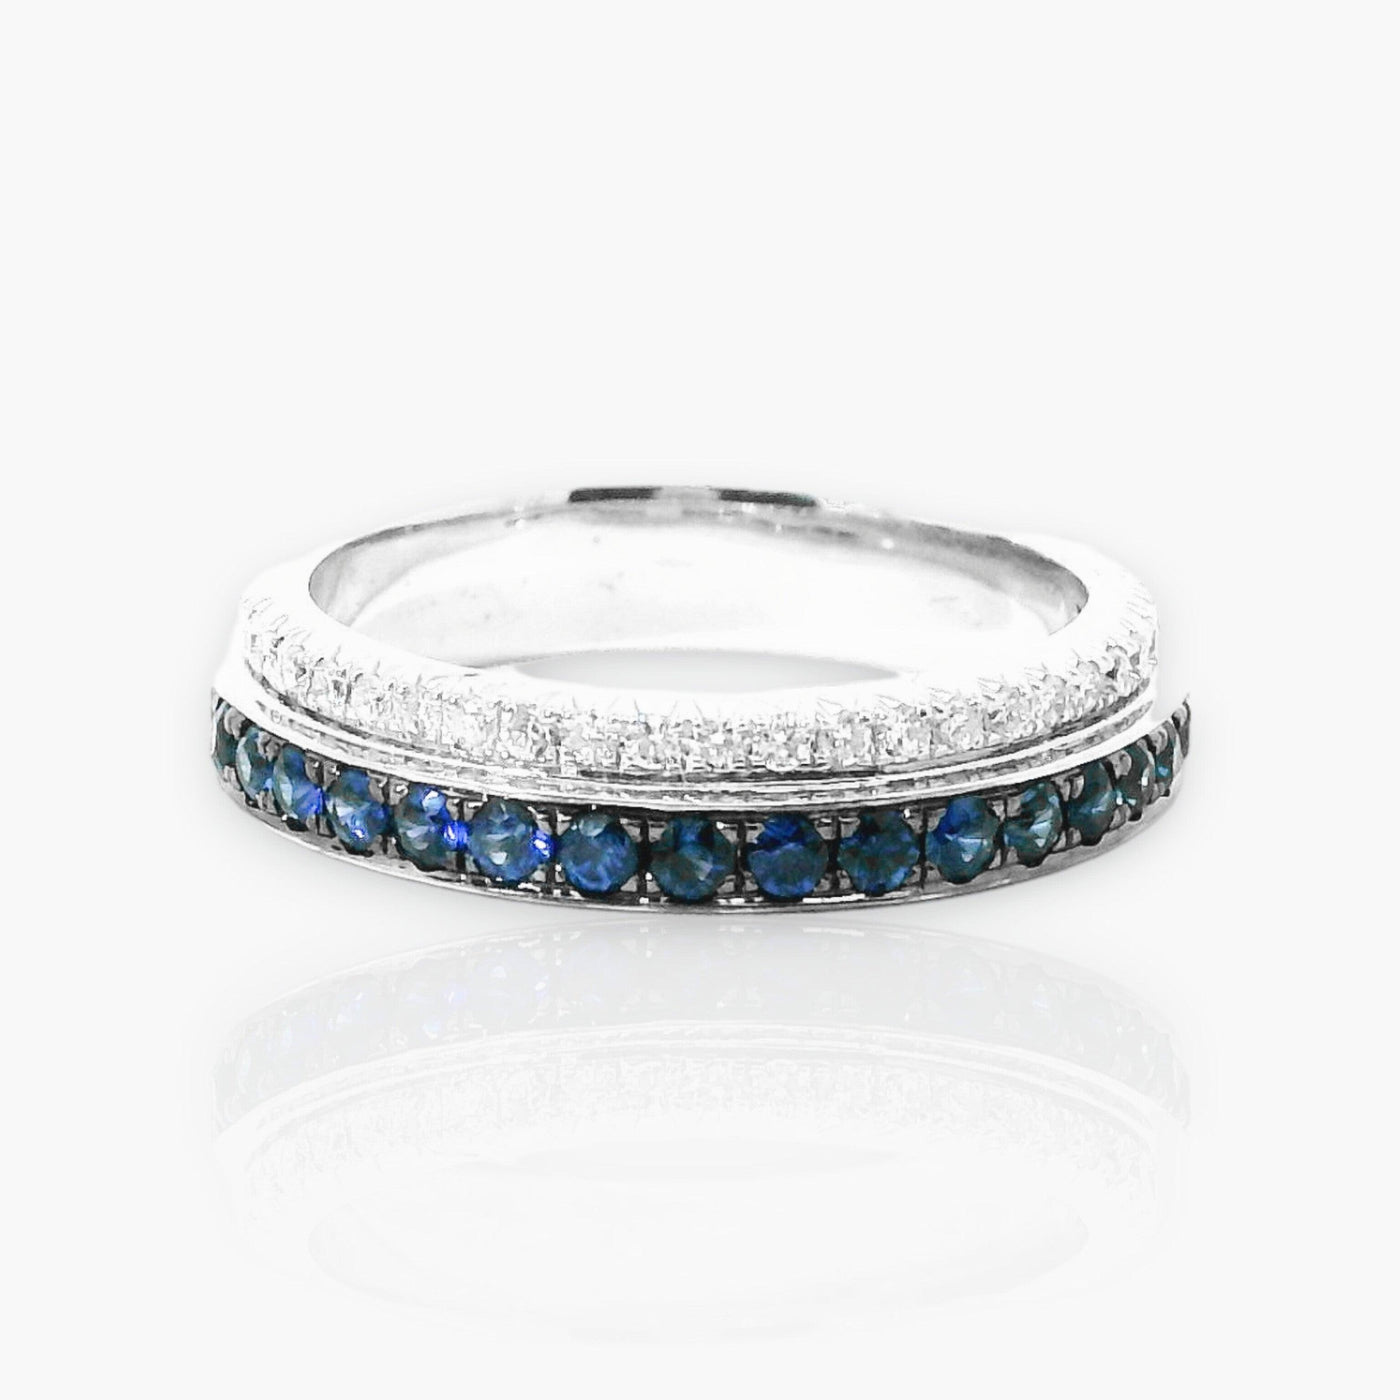 Anniversary Ring with Diamonds and Sapphires - Moregola Fine Jewelry